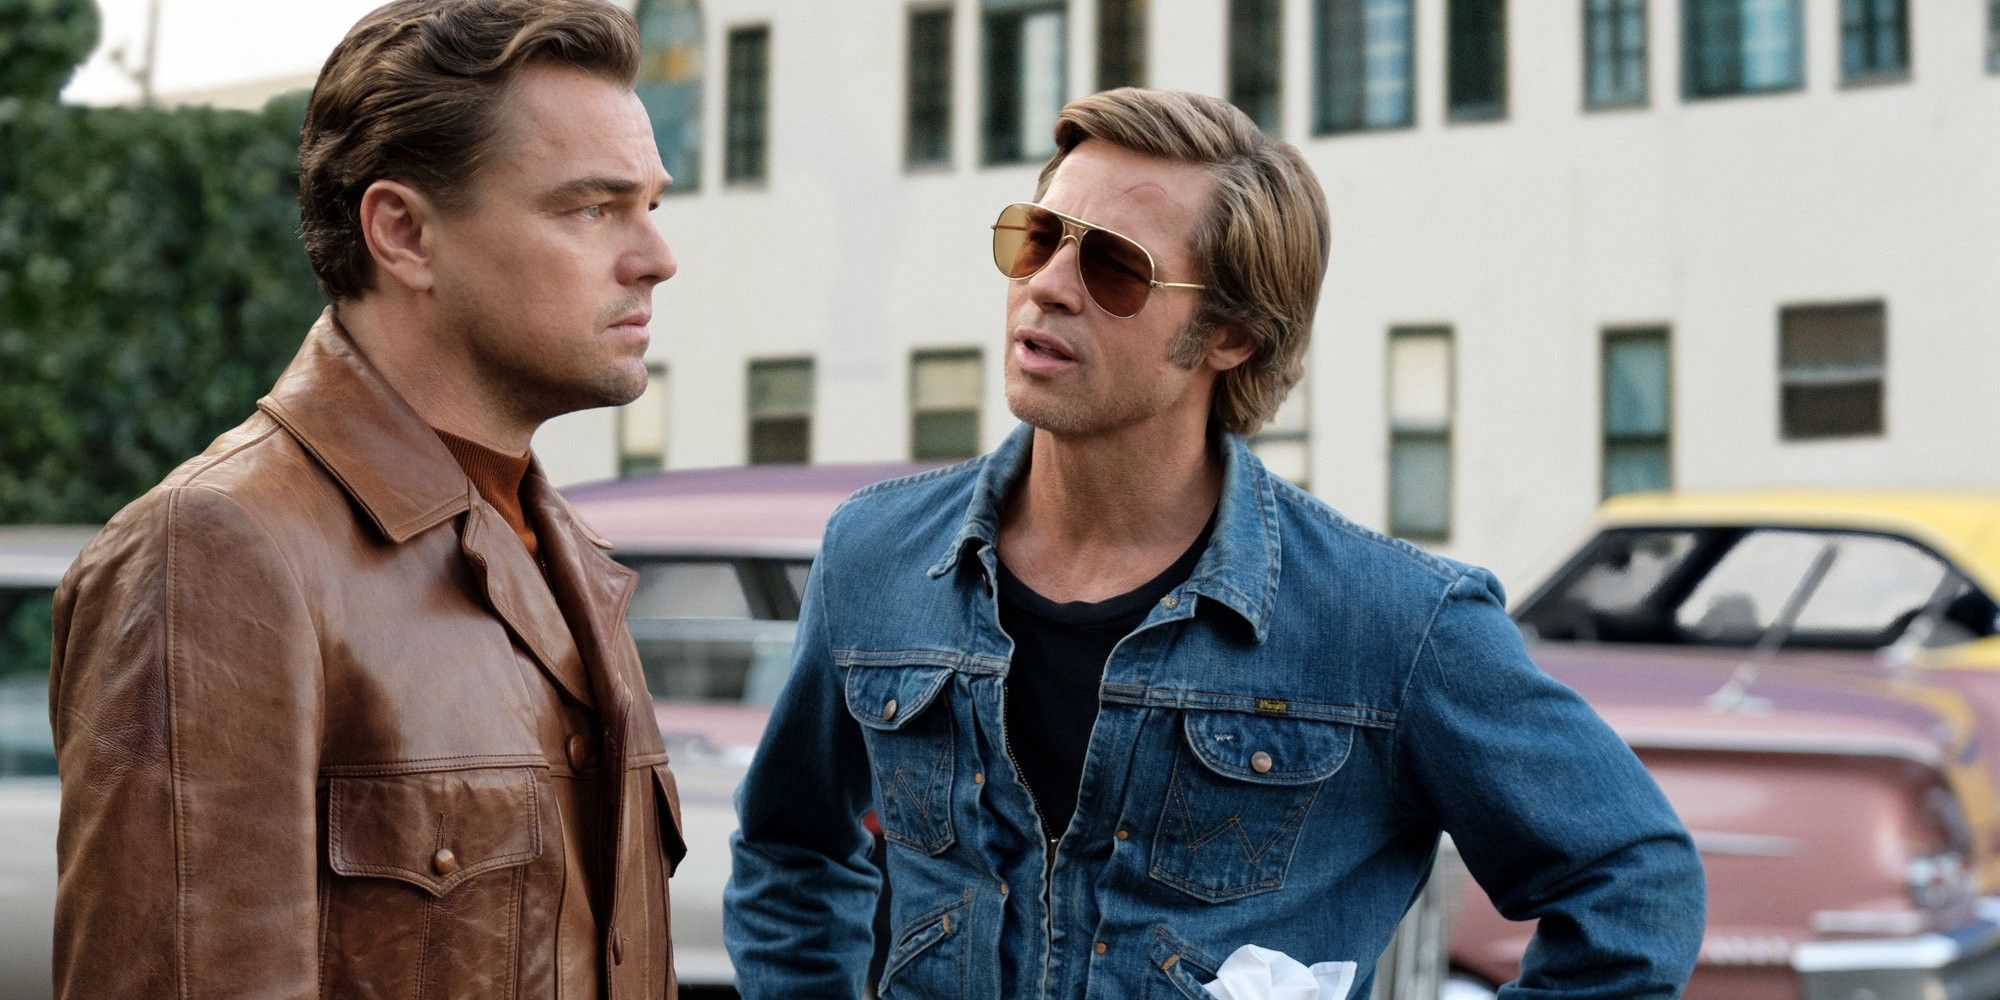 Leonardo DiCaprio and Brad Pitt in 'Once Upon a Time in Hollywood'